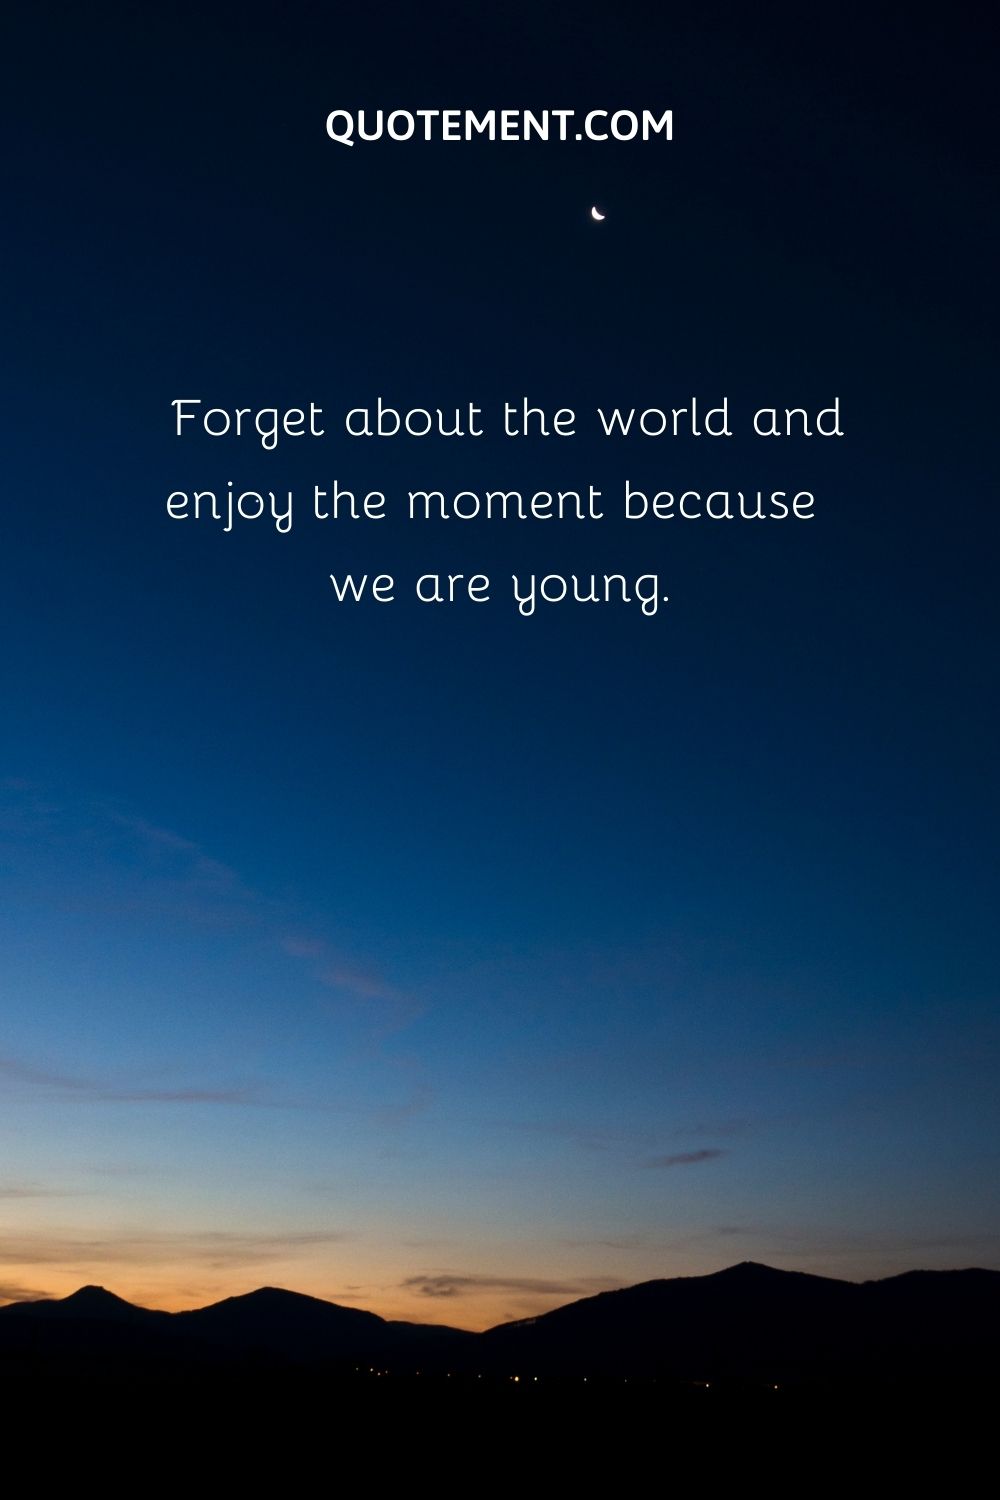 Forget about the world and enjoy the moment because we are young